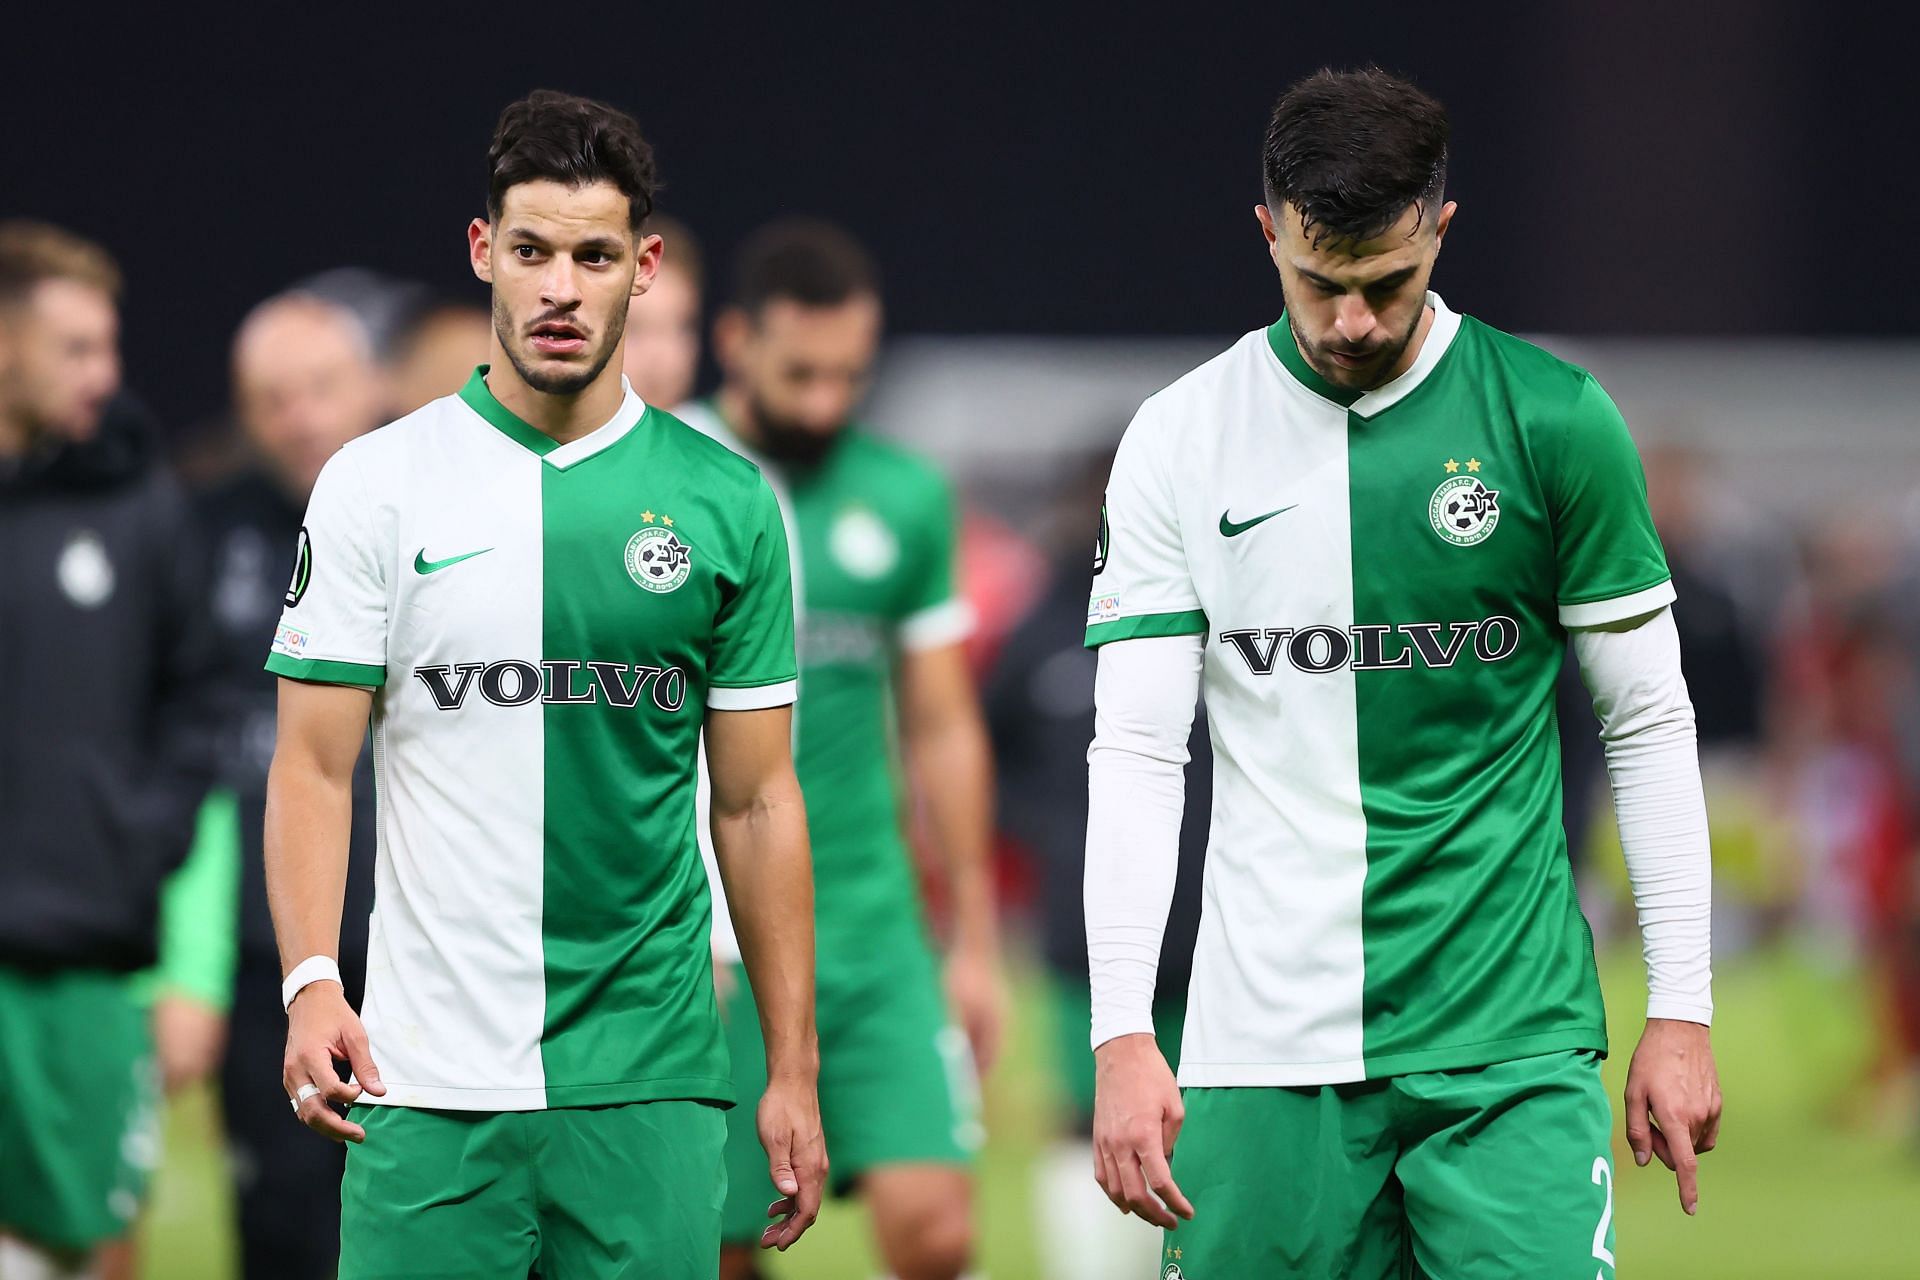 Maccabi Haifa are looking for their second title of the year